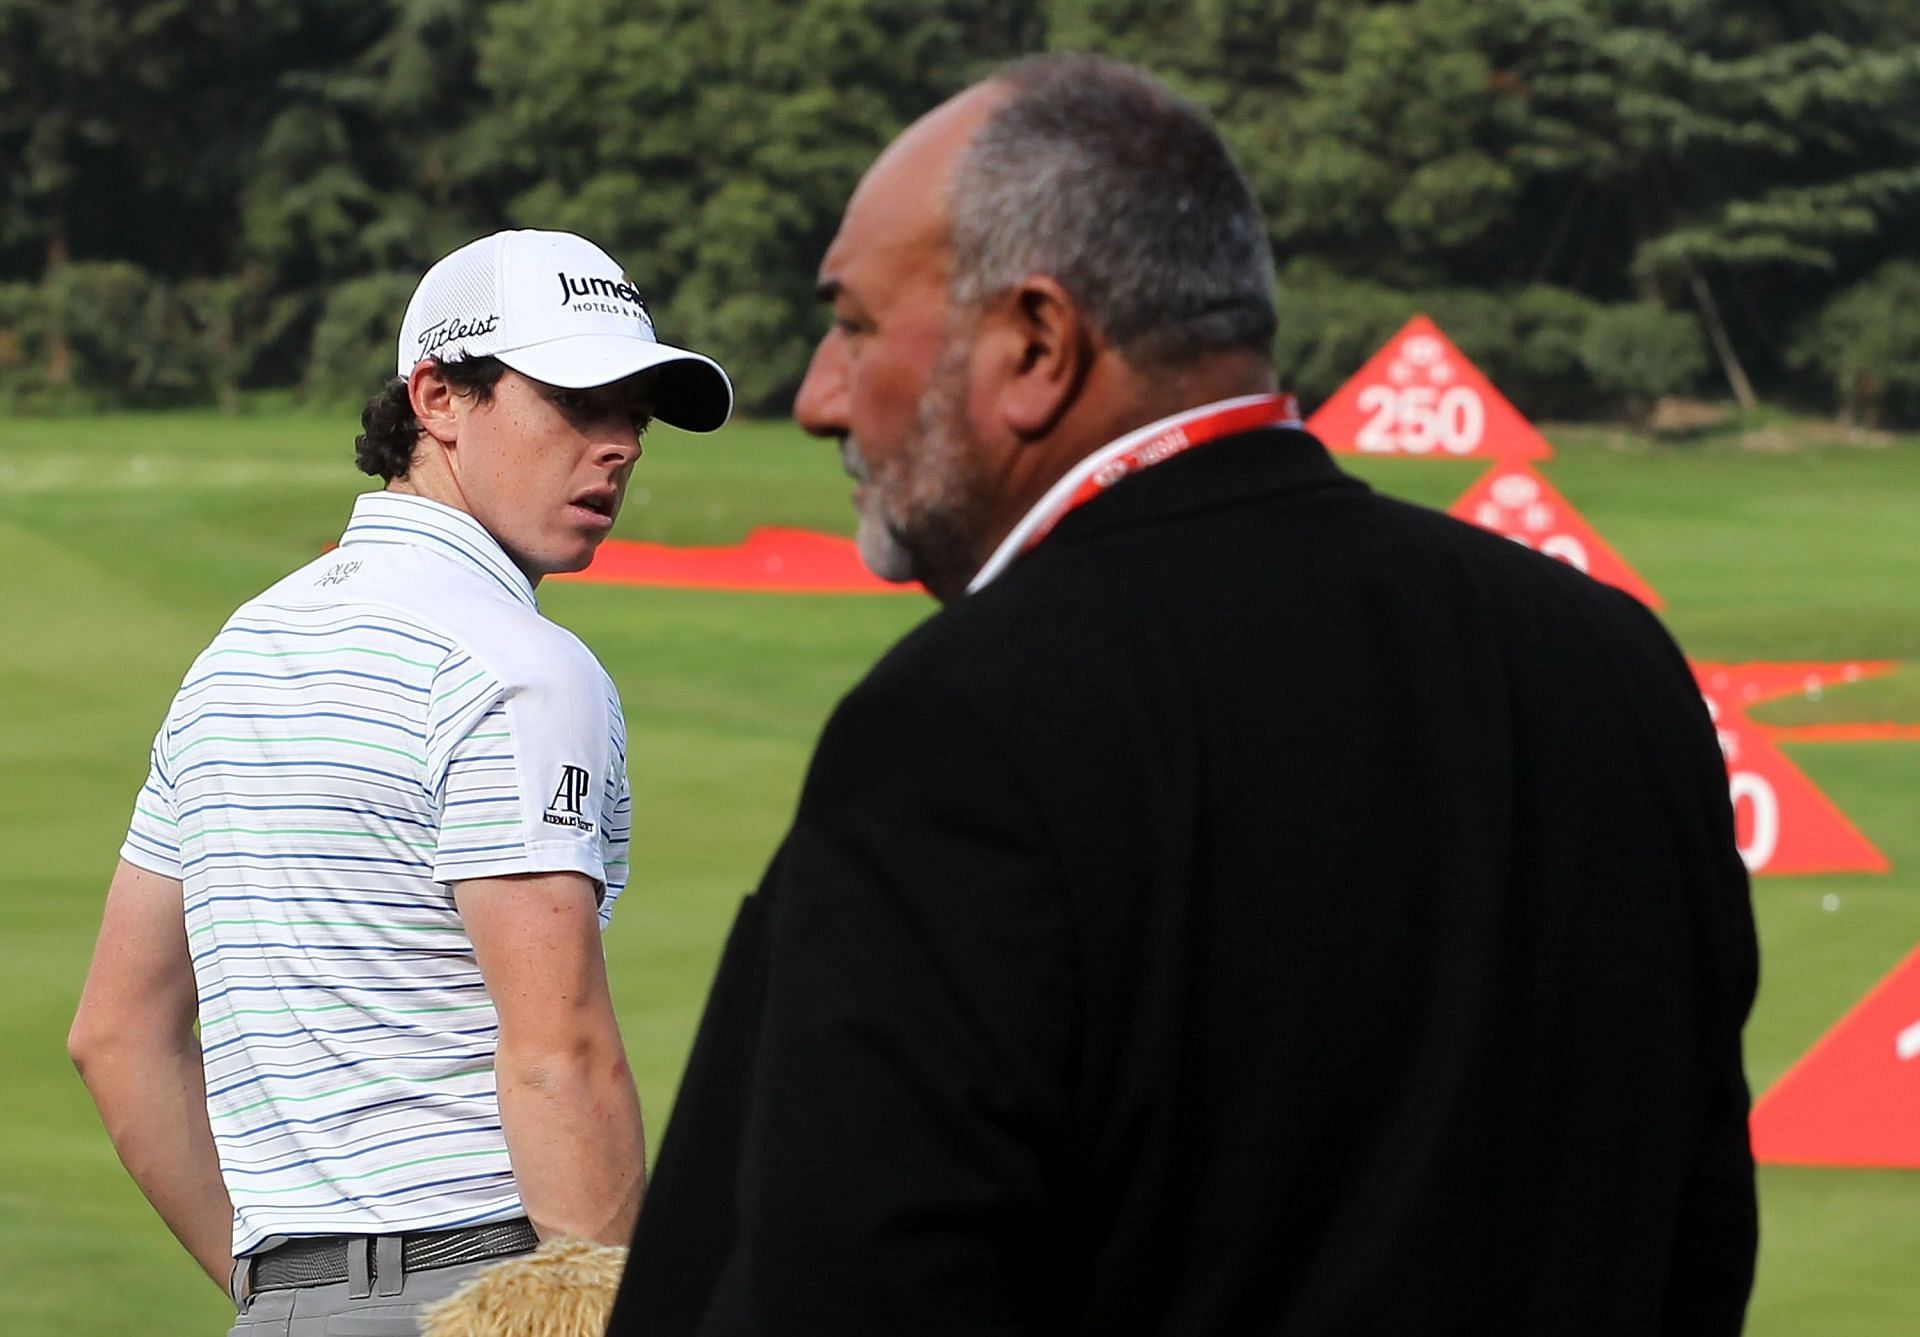 McIlroy and Chubby Chandler at the 2011 HSBC Champions (Image via Getty).